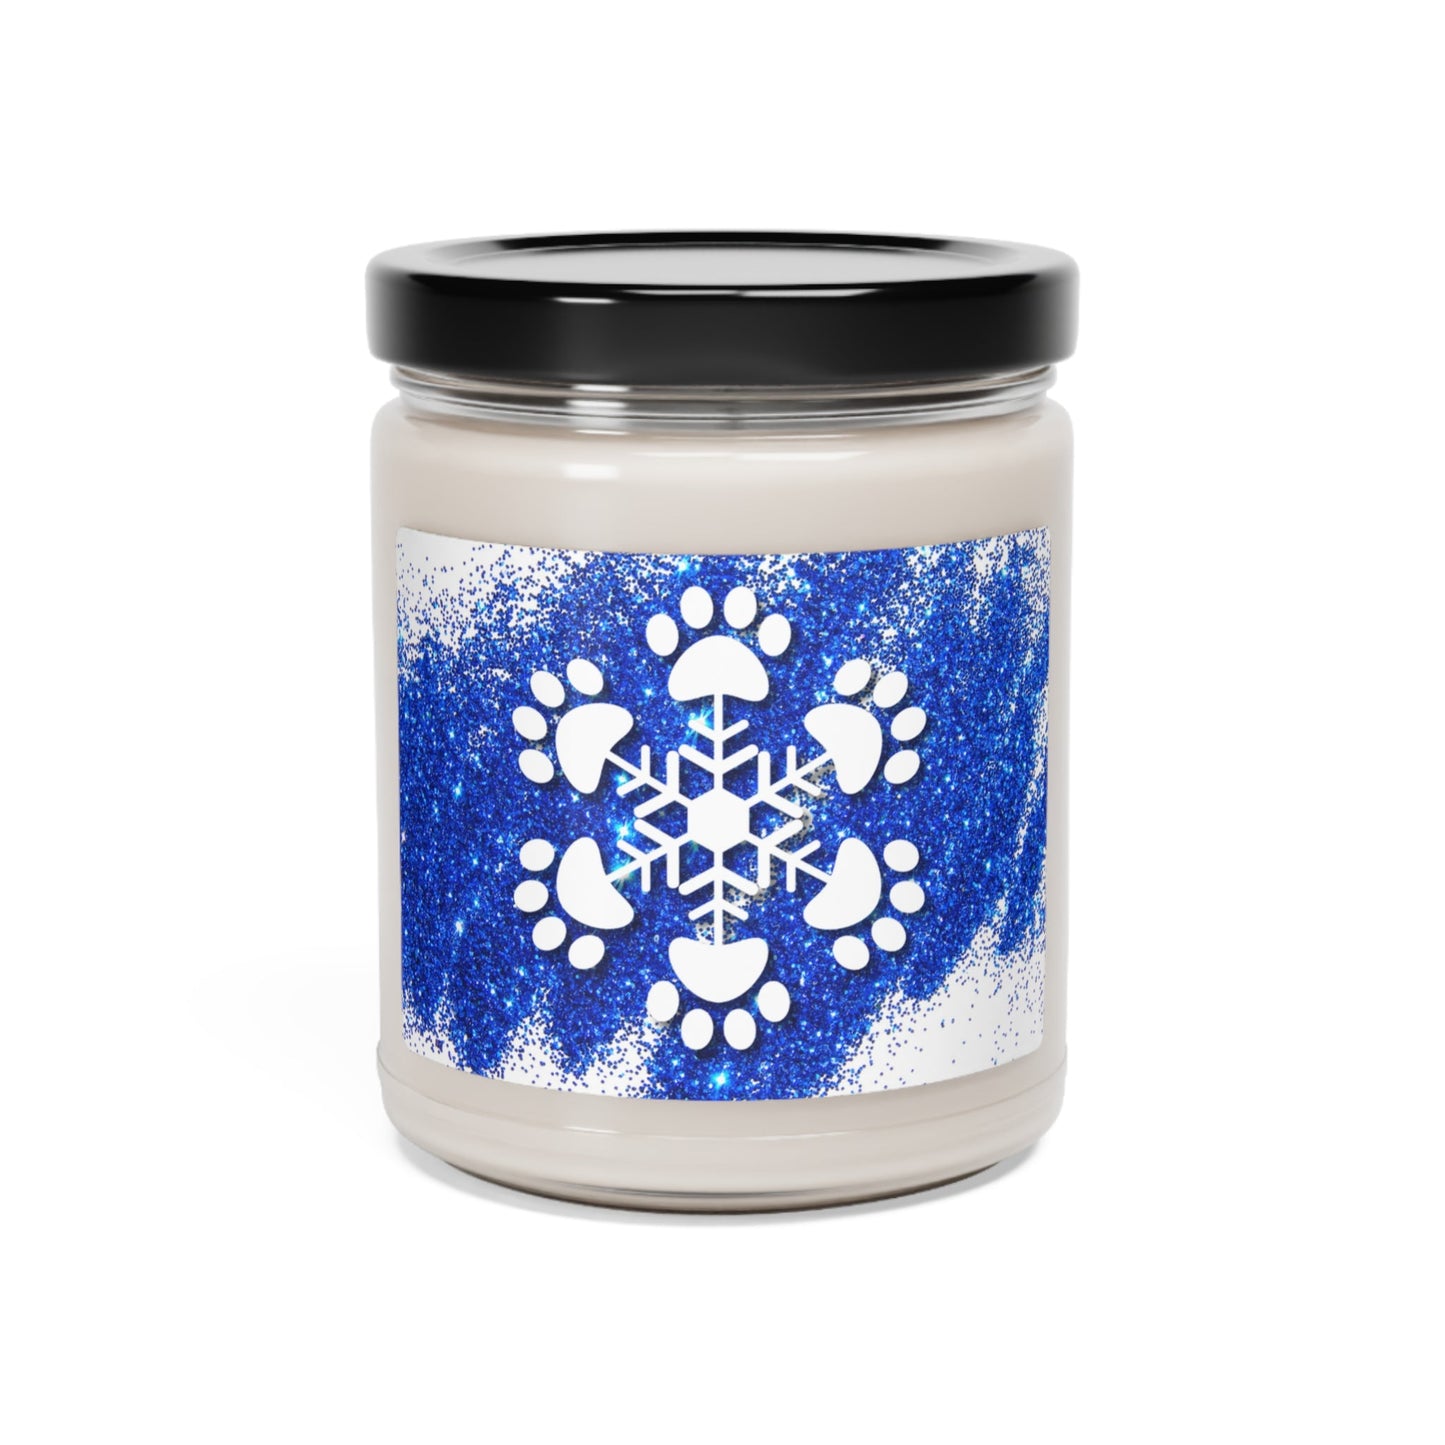 Paw Snowflake Scented Soy Candle, 9oz - Home Decor - Epileptic Al’s Shop